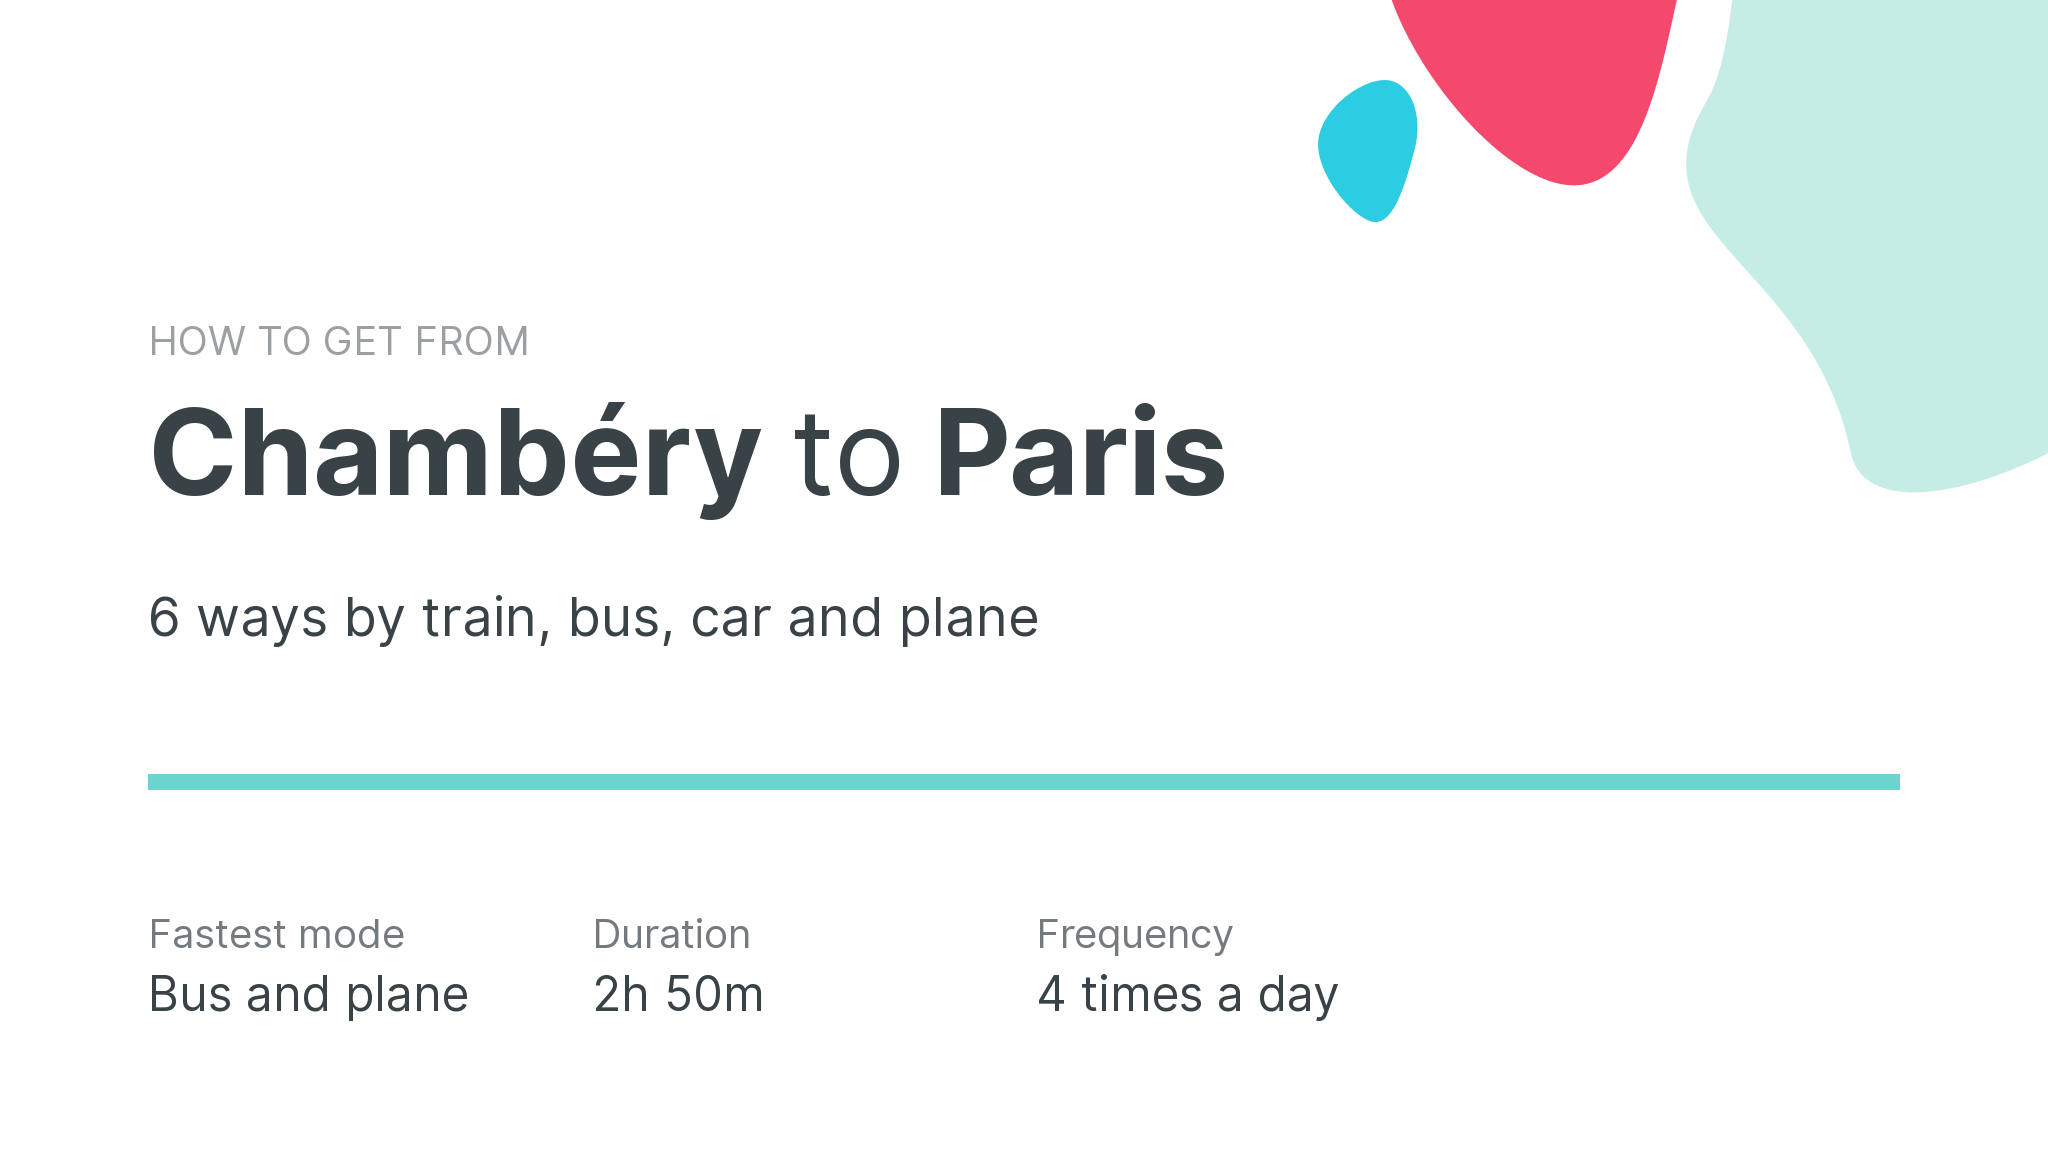 How do I get from Chambéry to Paris